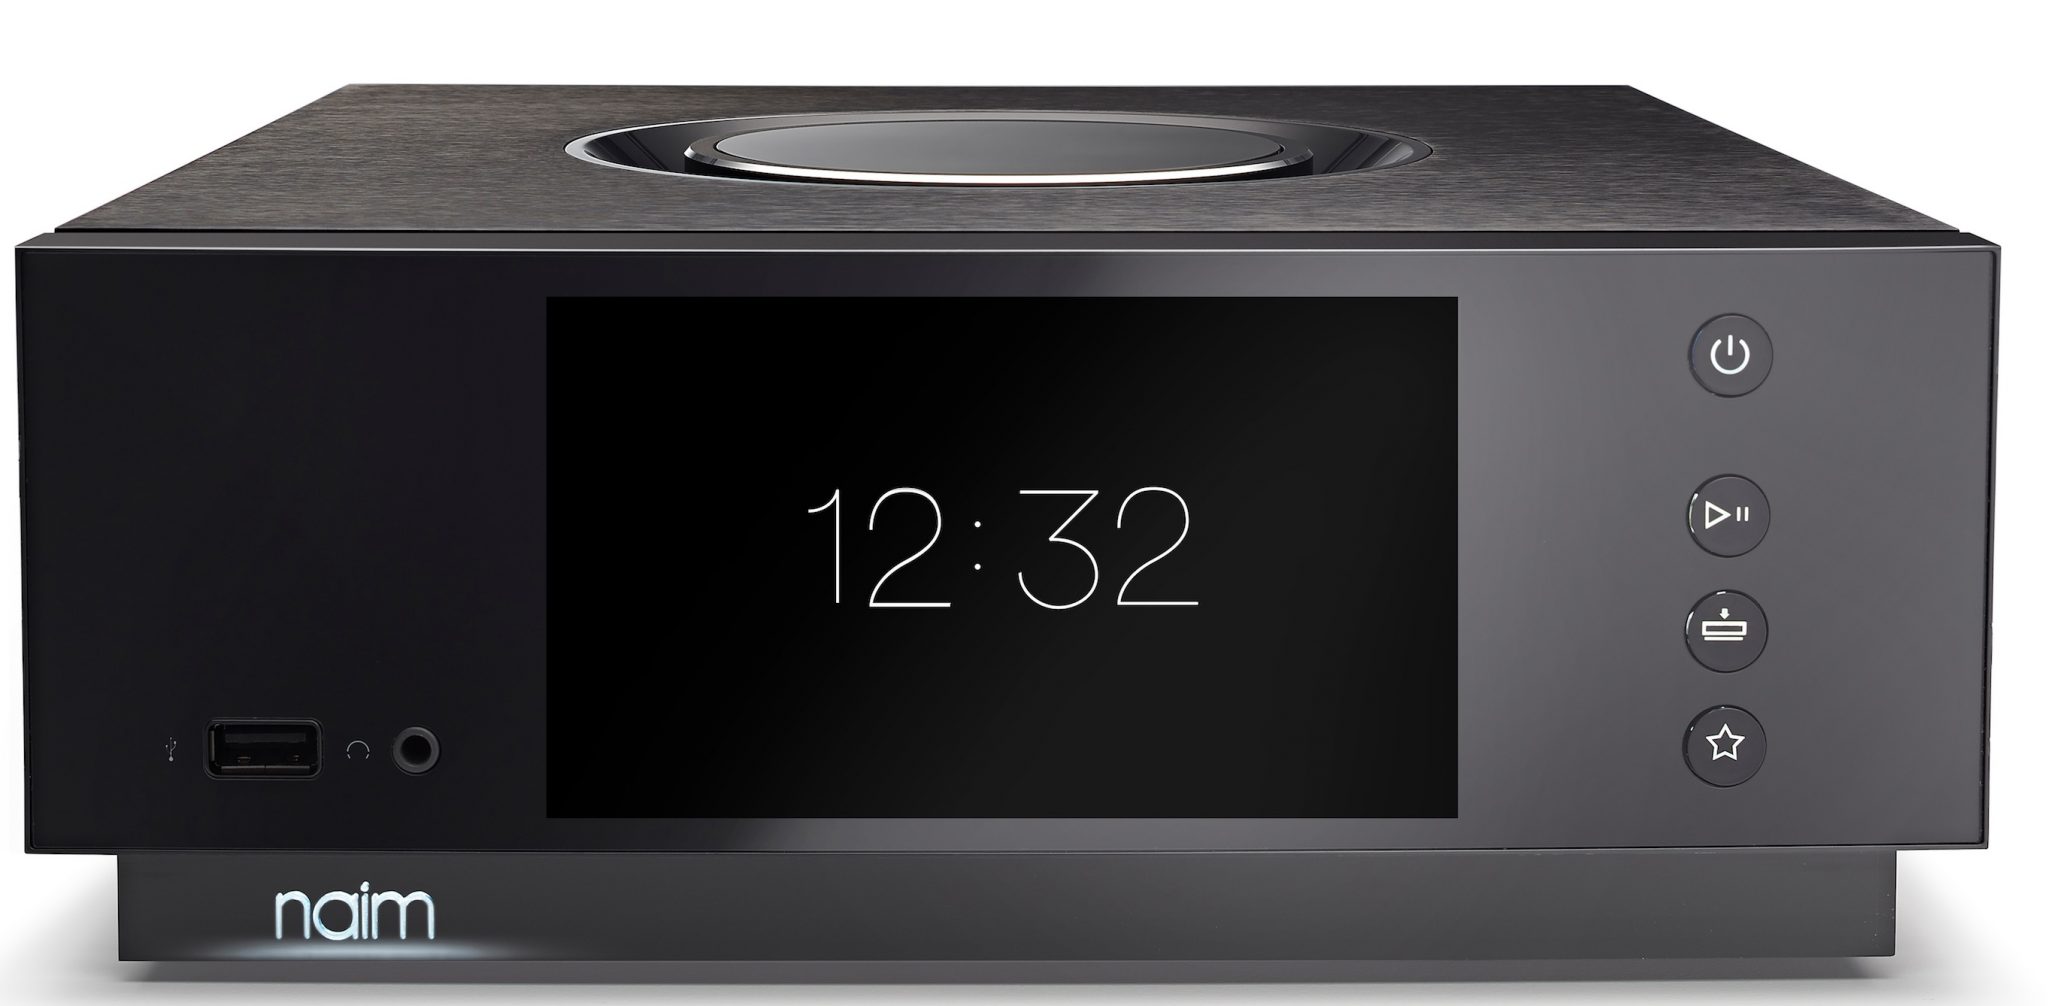 UNITI ATOM From Naim: One For All!